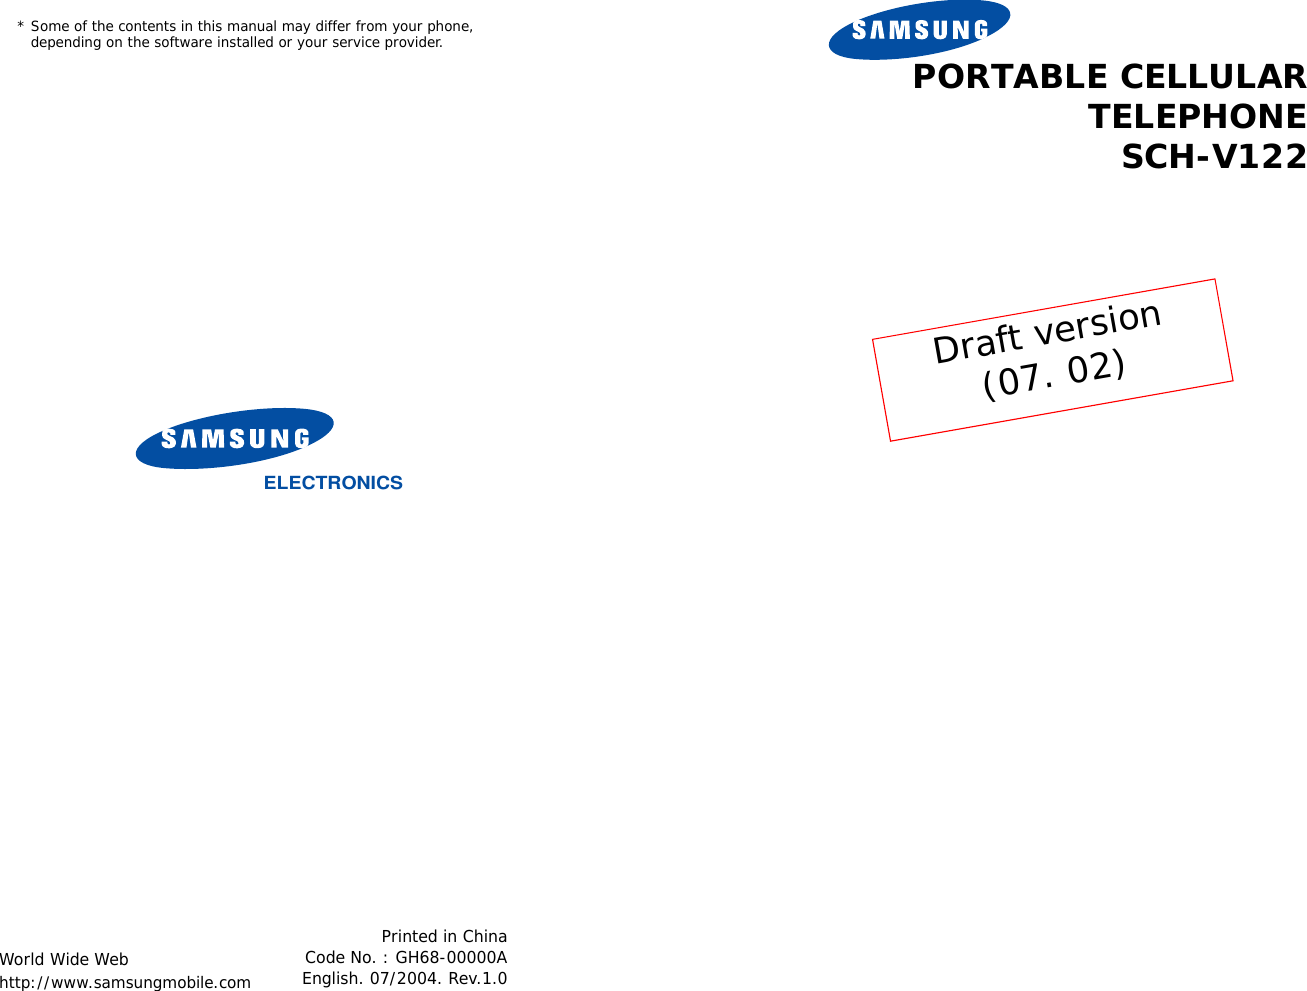 * Some of the contents in this manual may differ from your phone,   depending on the software installed or your service provider.World Wide Webhttp://www.samsungmobile.comPrinted in ChinaCode No. : GH68-00000AEnglish. 07/2004. Rev.1.0ELECTRONICSPORTABLE CELLULARTELEPHONESCH-V122Draft version(07. 02)